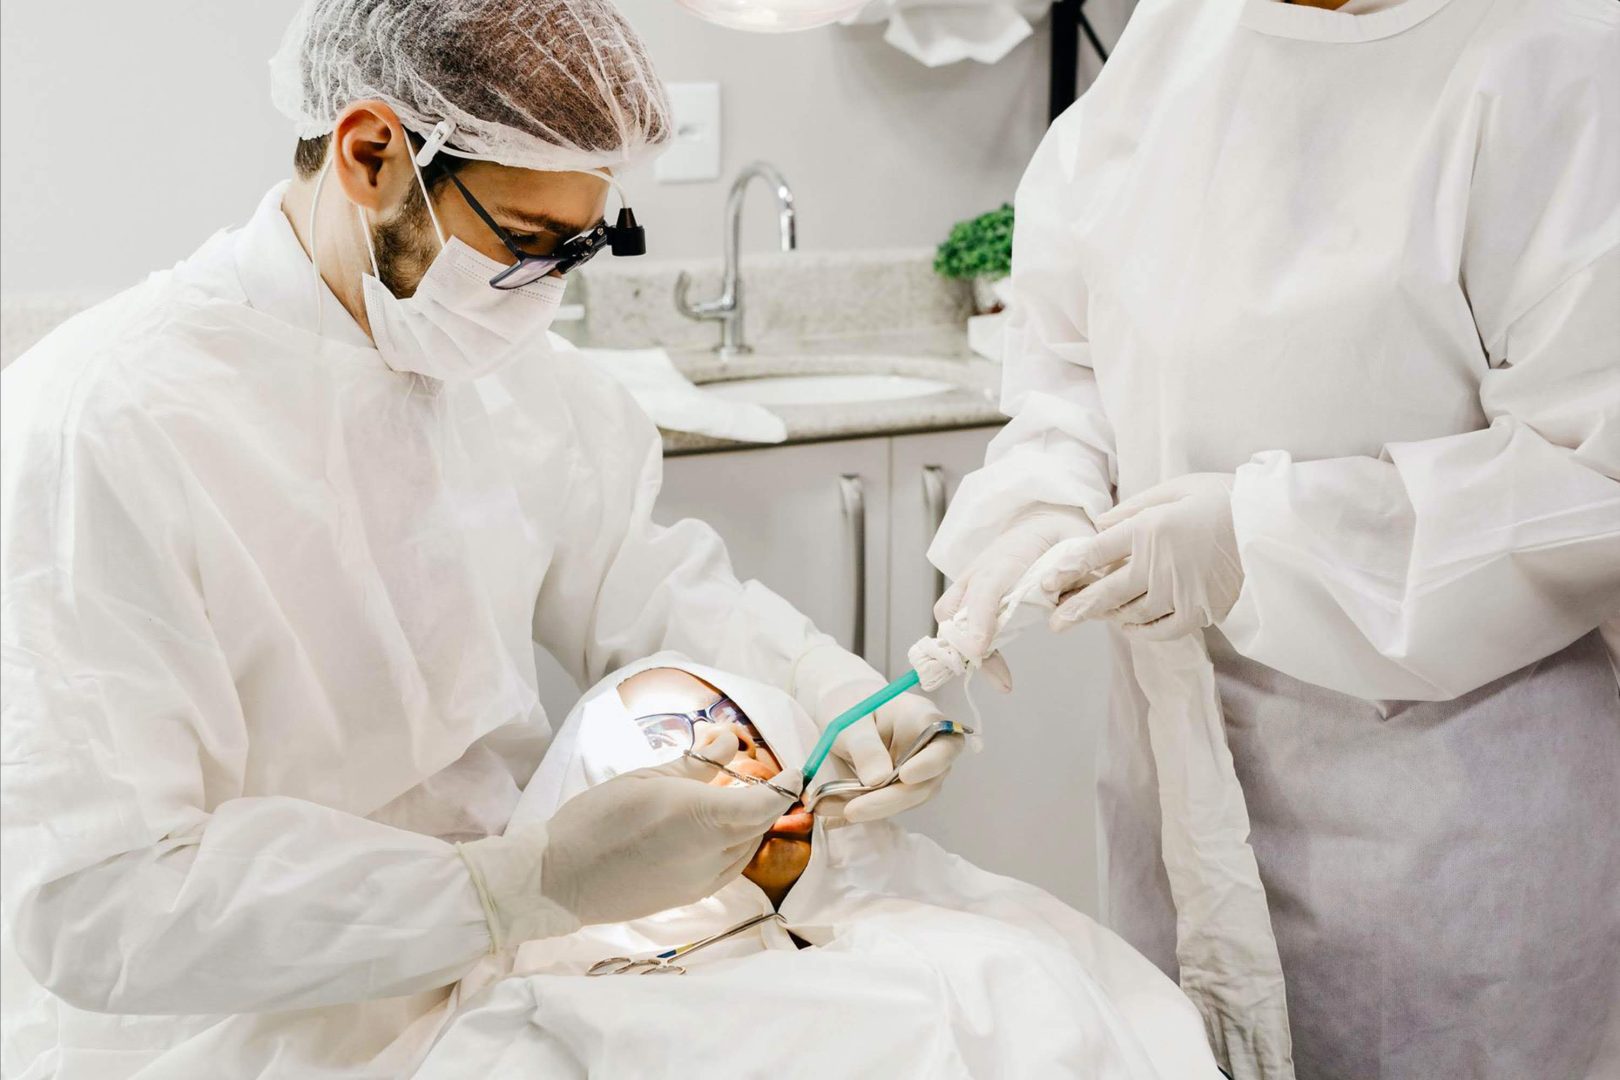 Dental assistant during in-person practicum as part of Risio's program